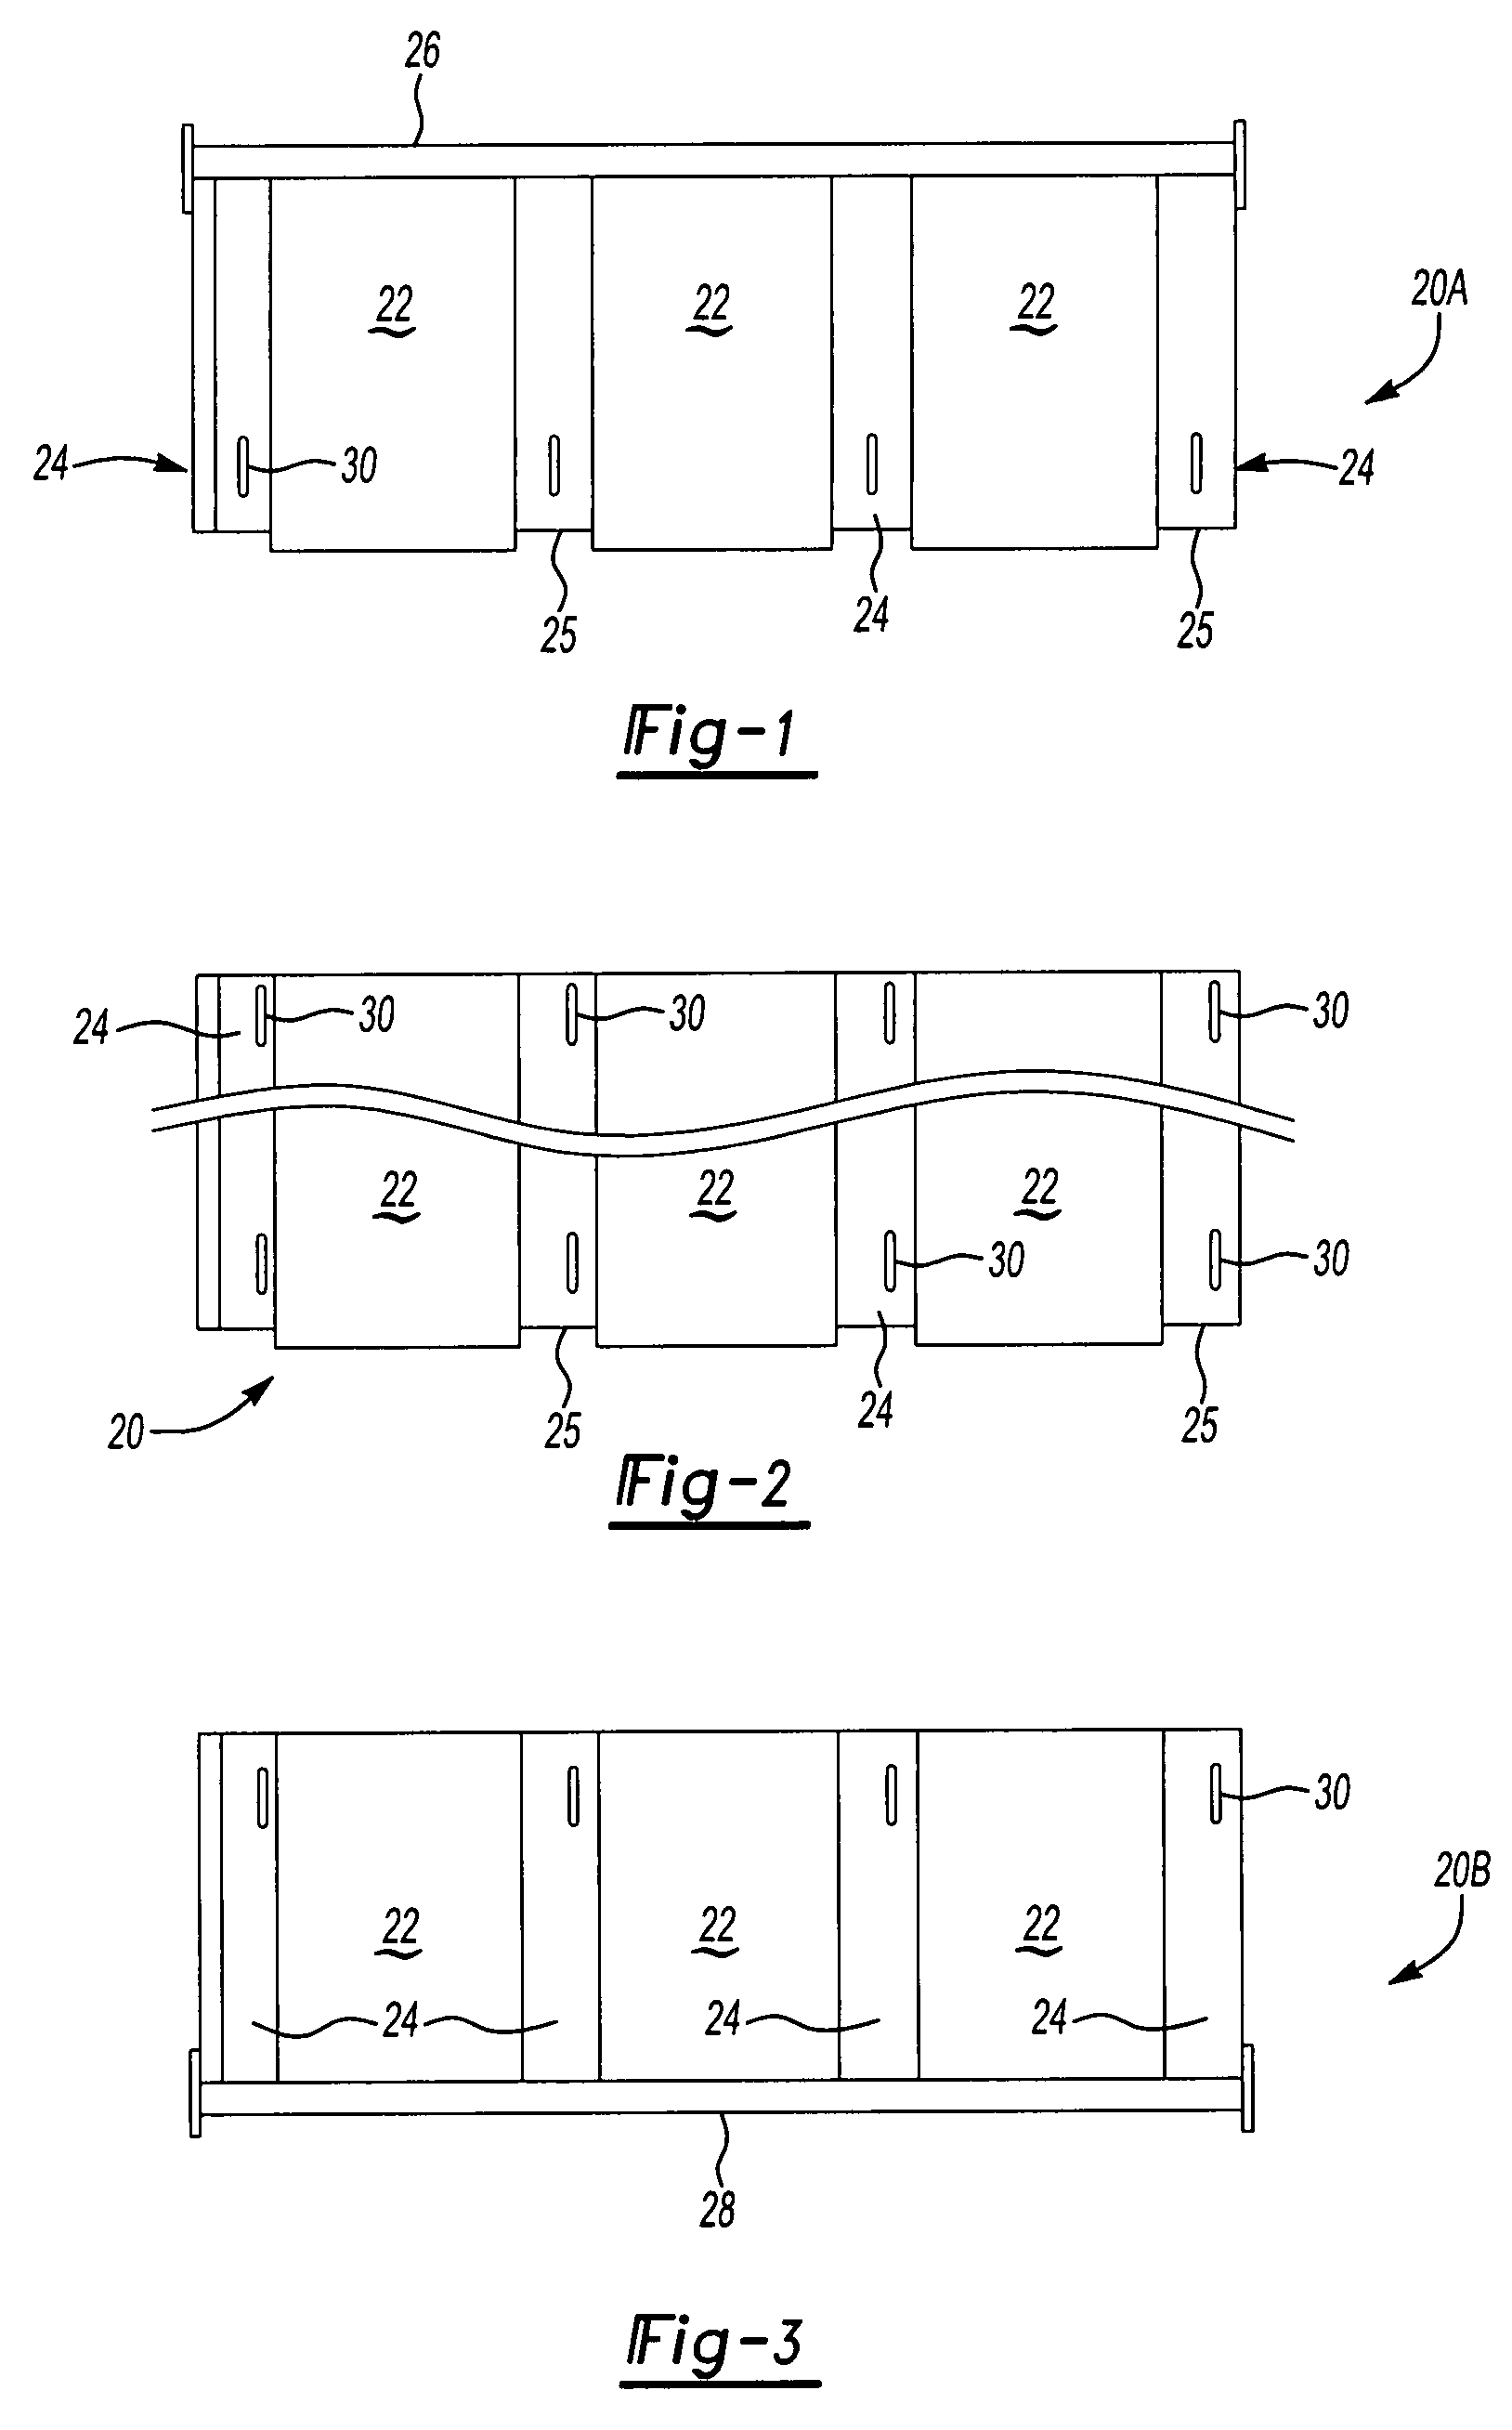 Method of making replacement collecting electrodes for an electrostatic precipitator